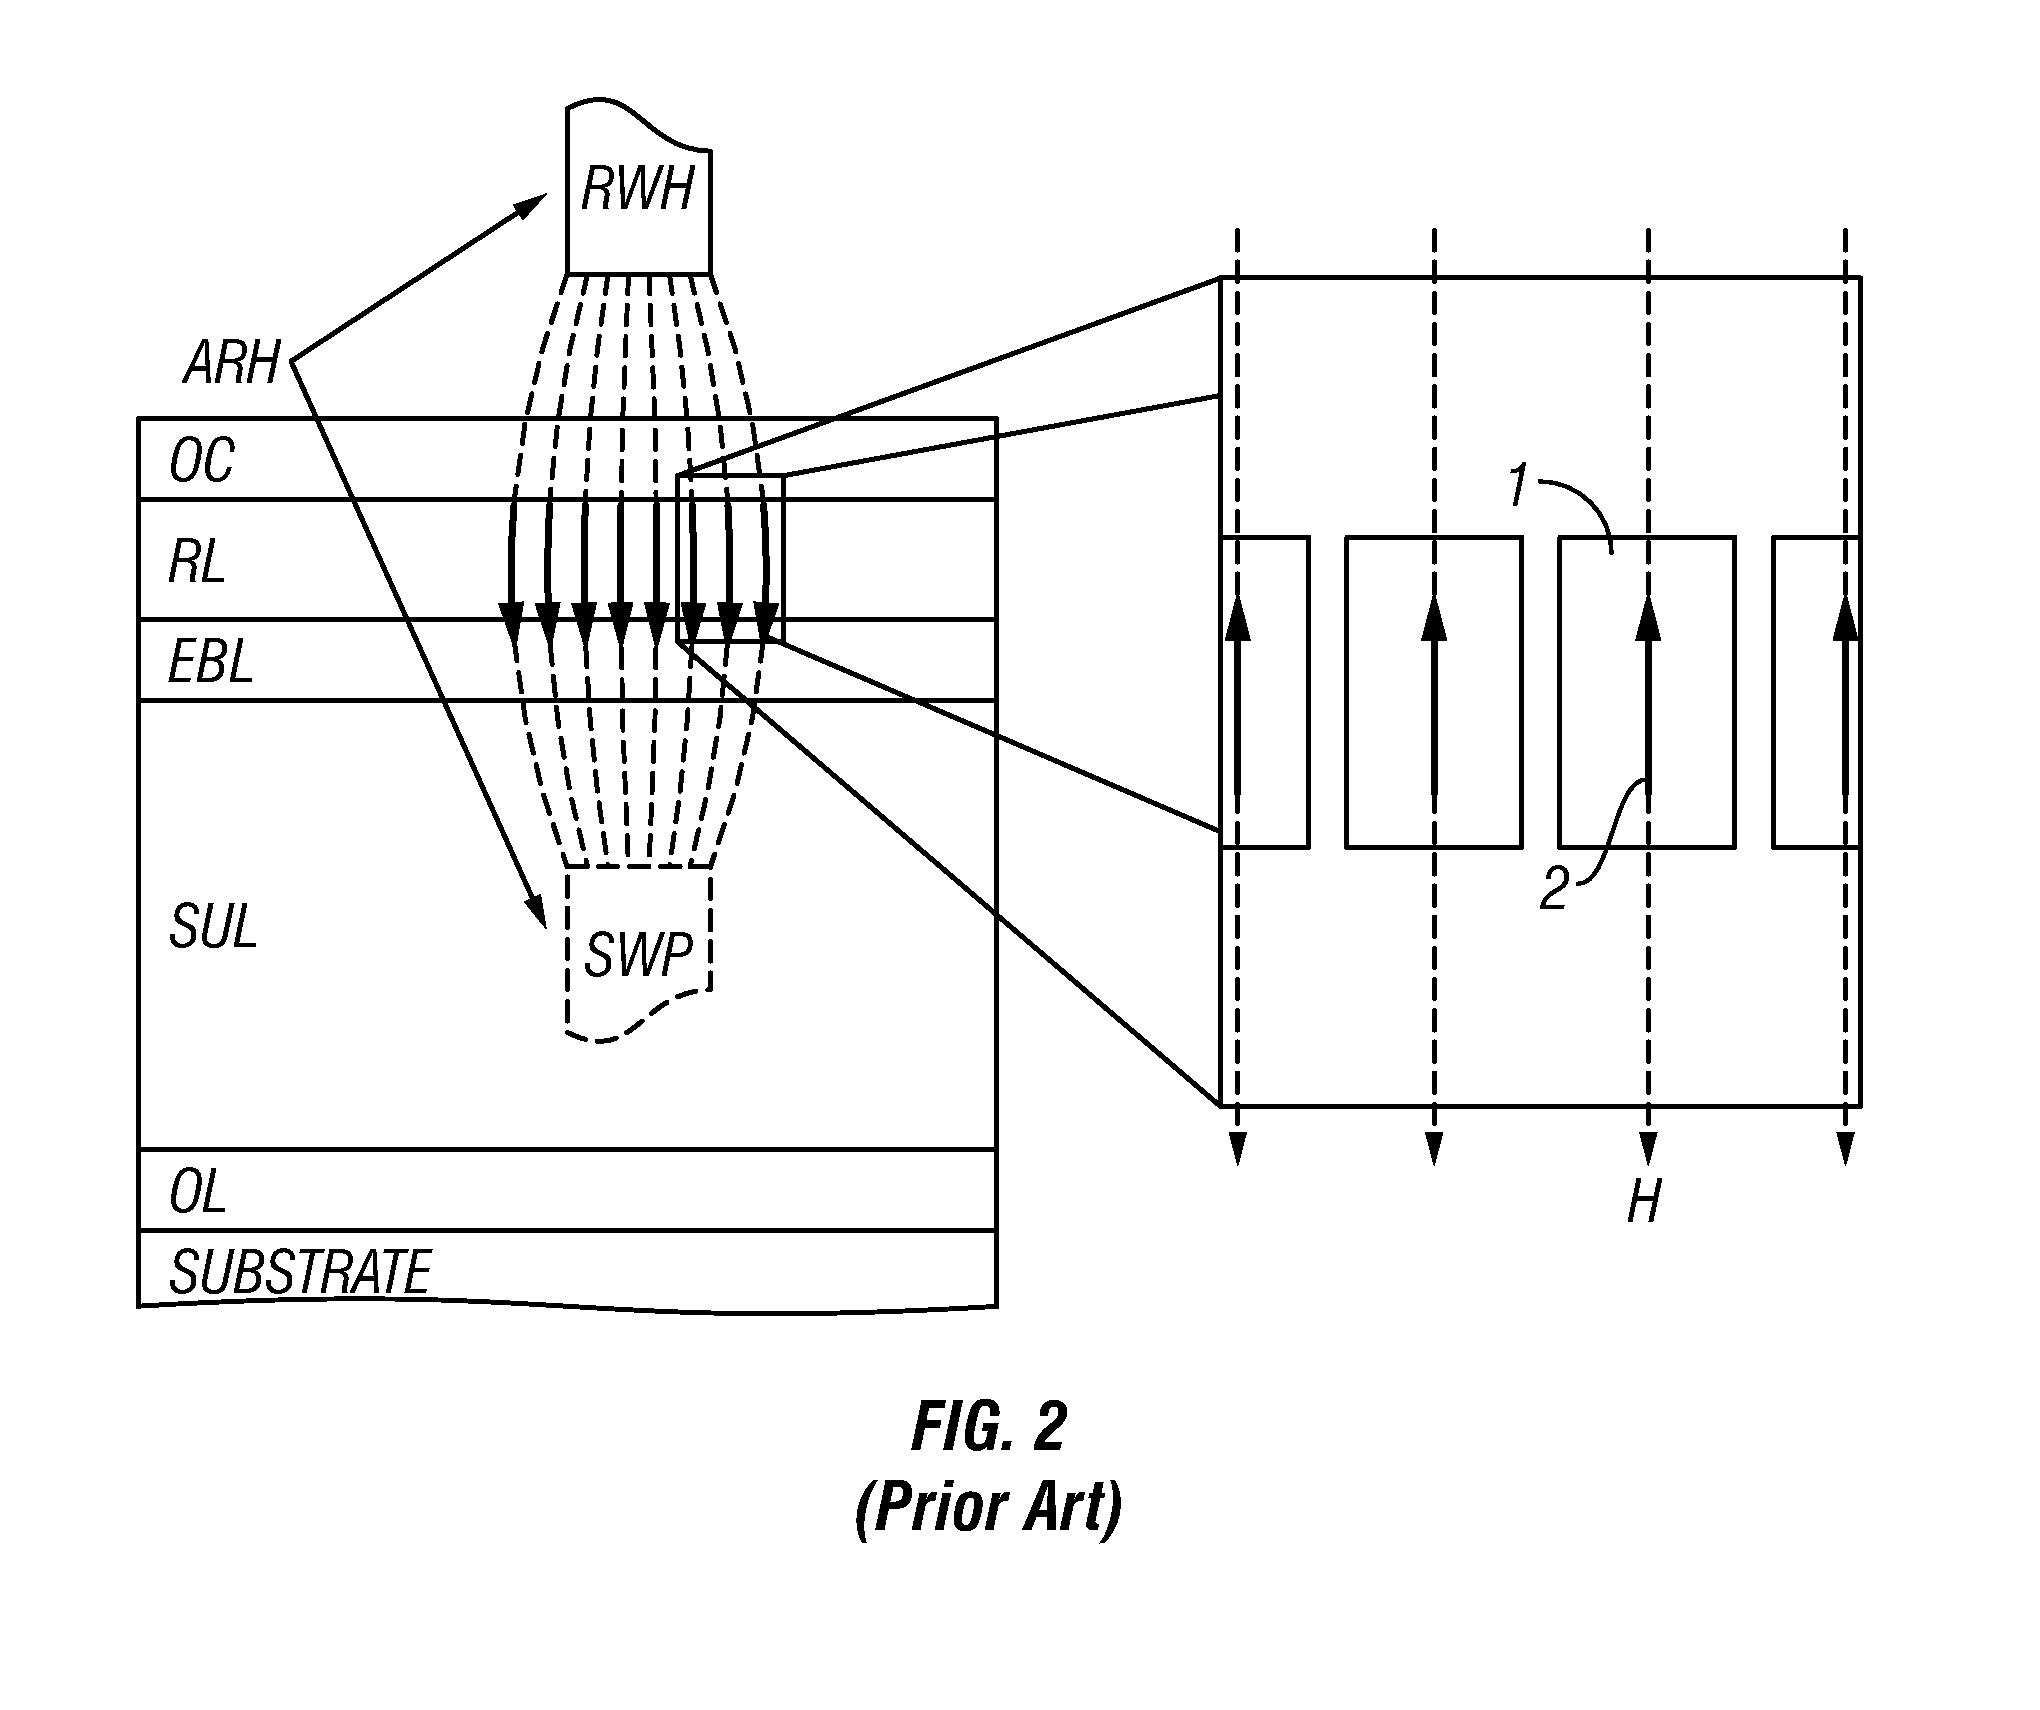 Perpendicular magnetic recording medium with an exchange-spring recording structure and a lateral coupling layer for increasing intergranular exchange coupling